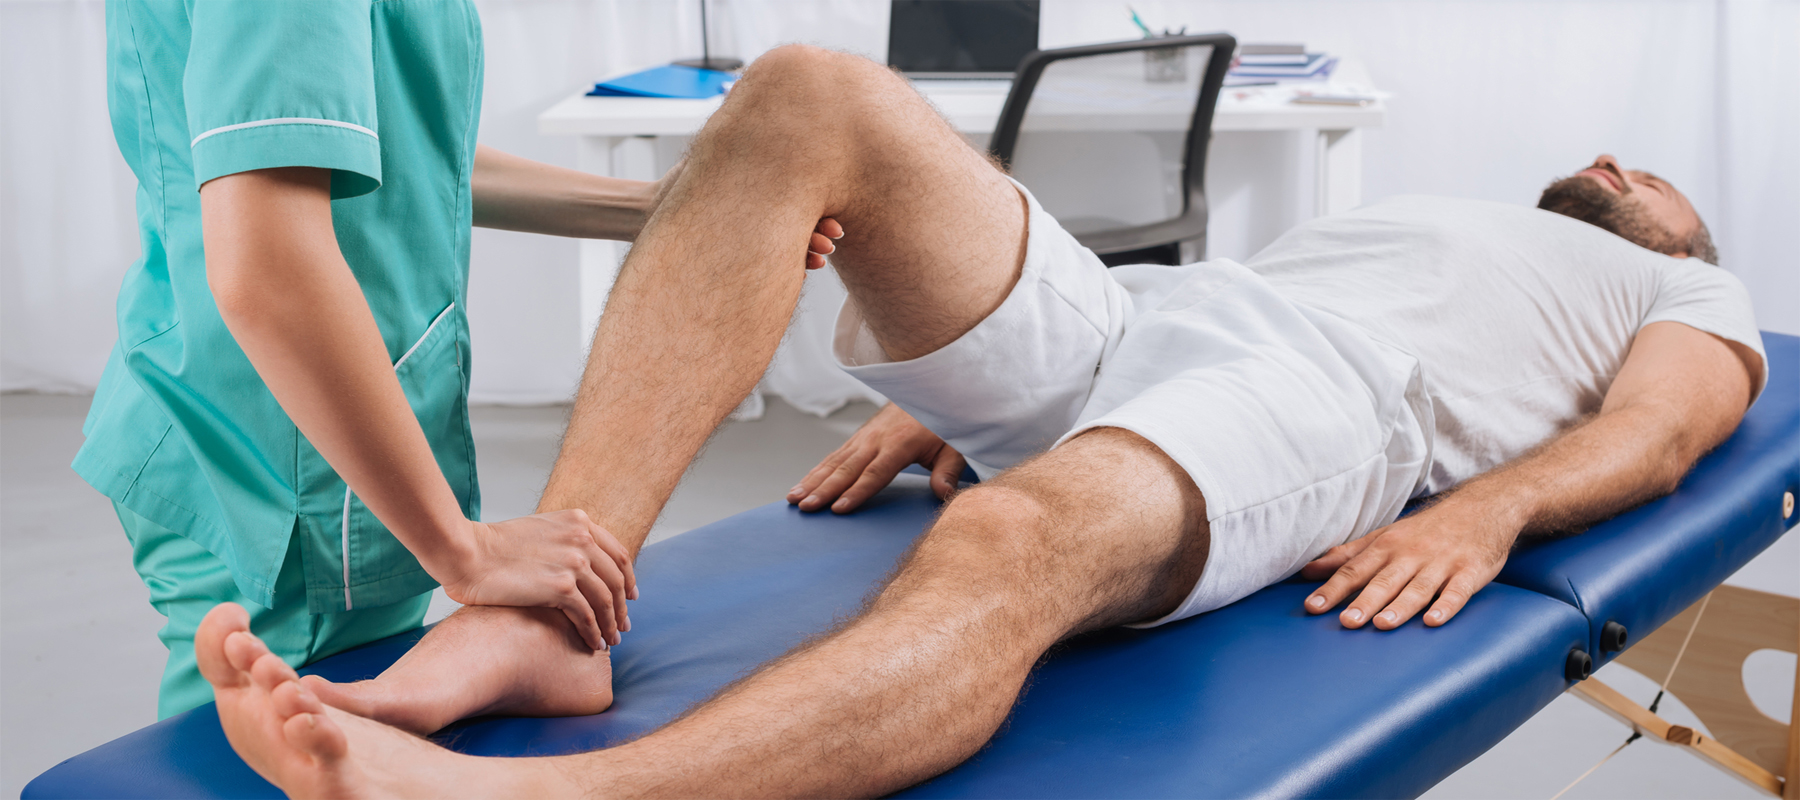 Physical Therapist Giving Man Treatment